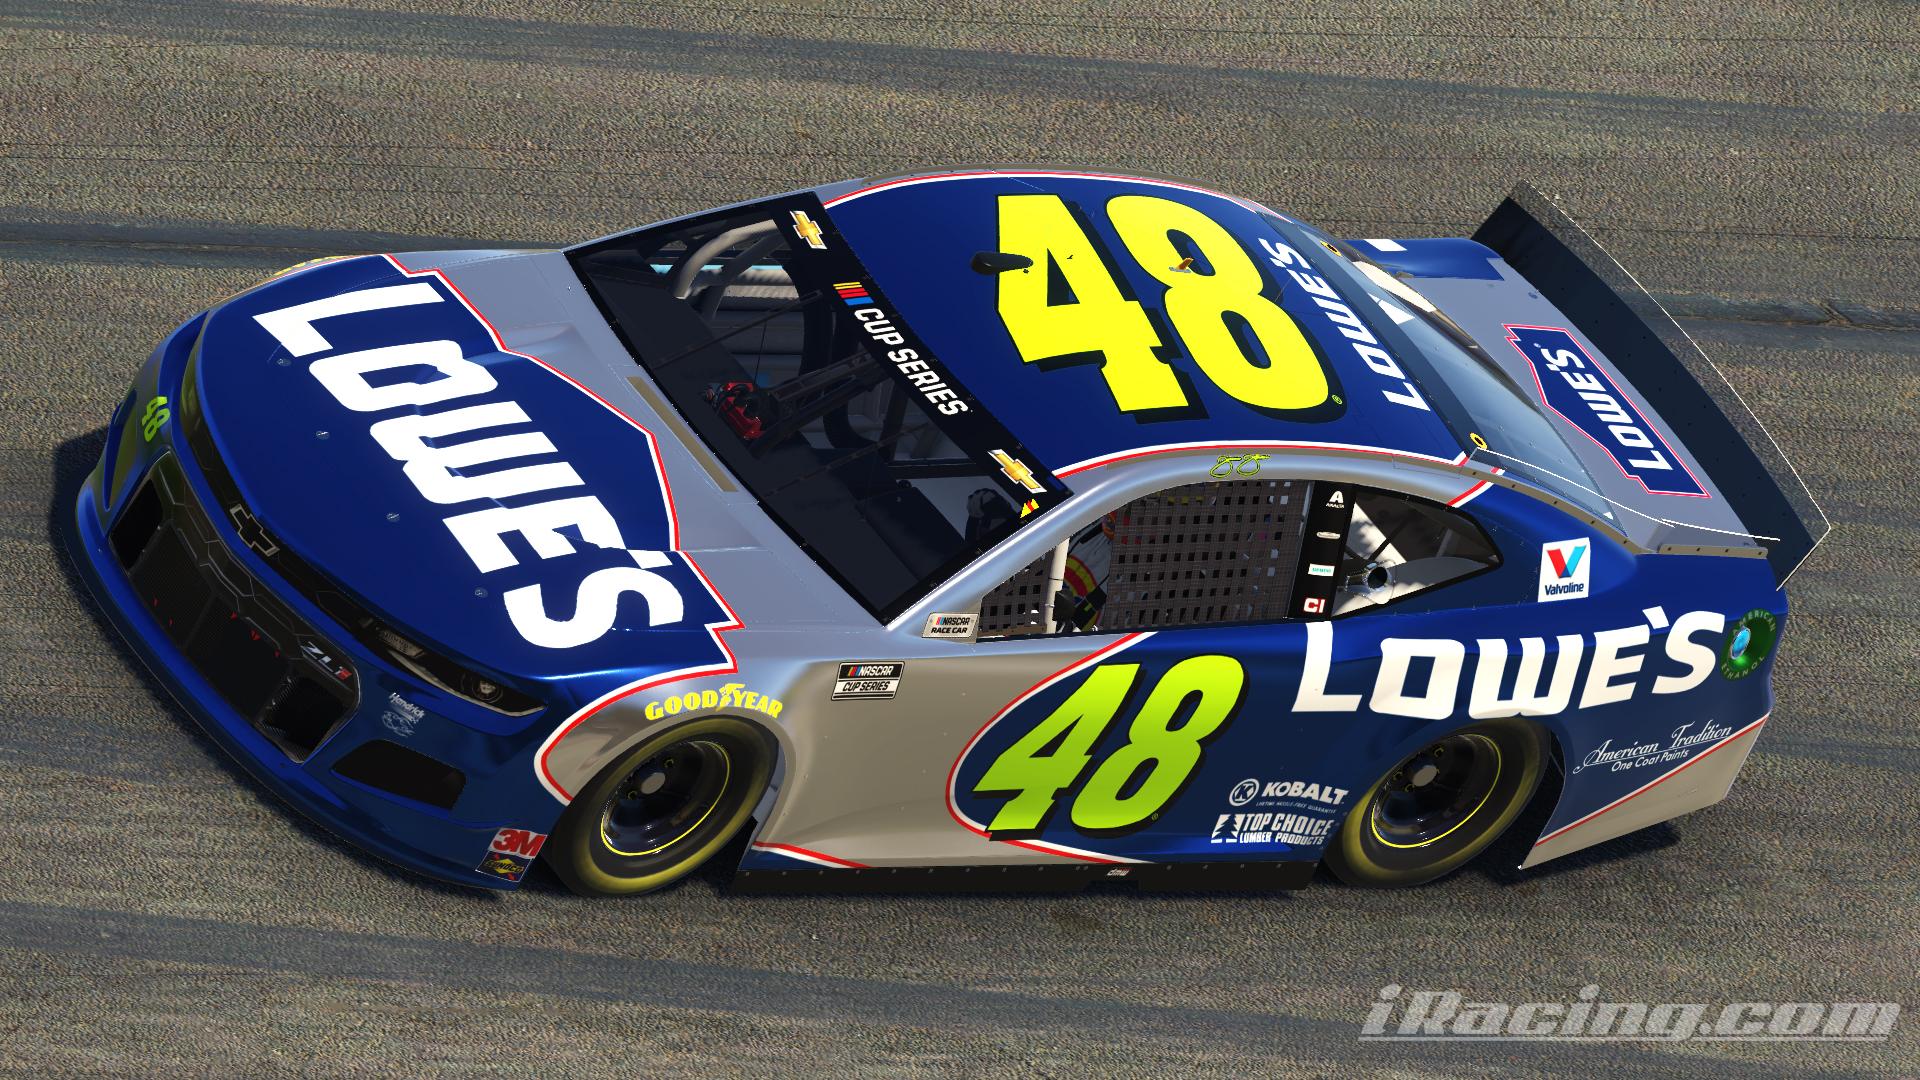 2020 Fictional Jimmie Johnson Lowes 48 Chevy by Dustin Winegardner